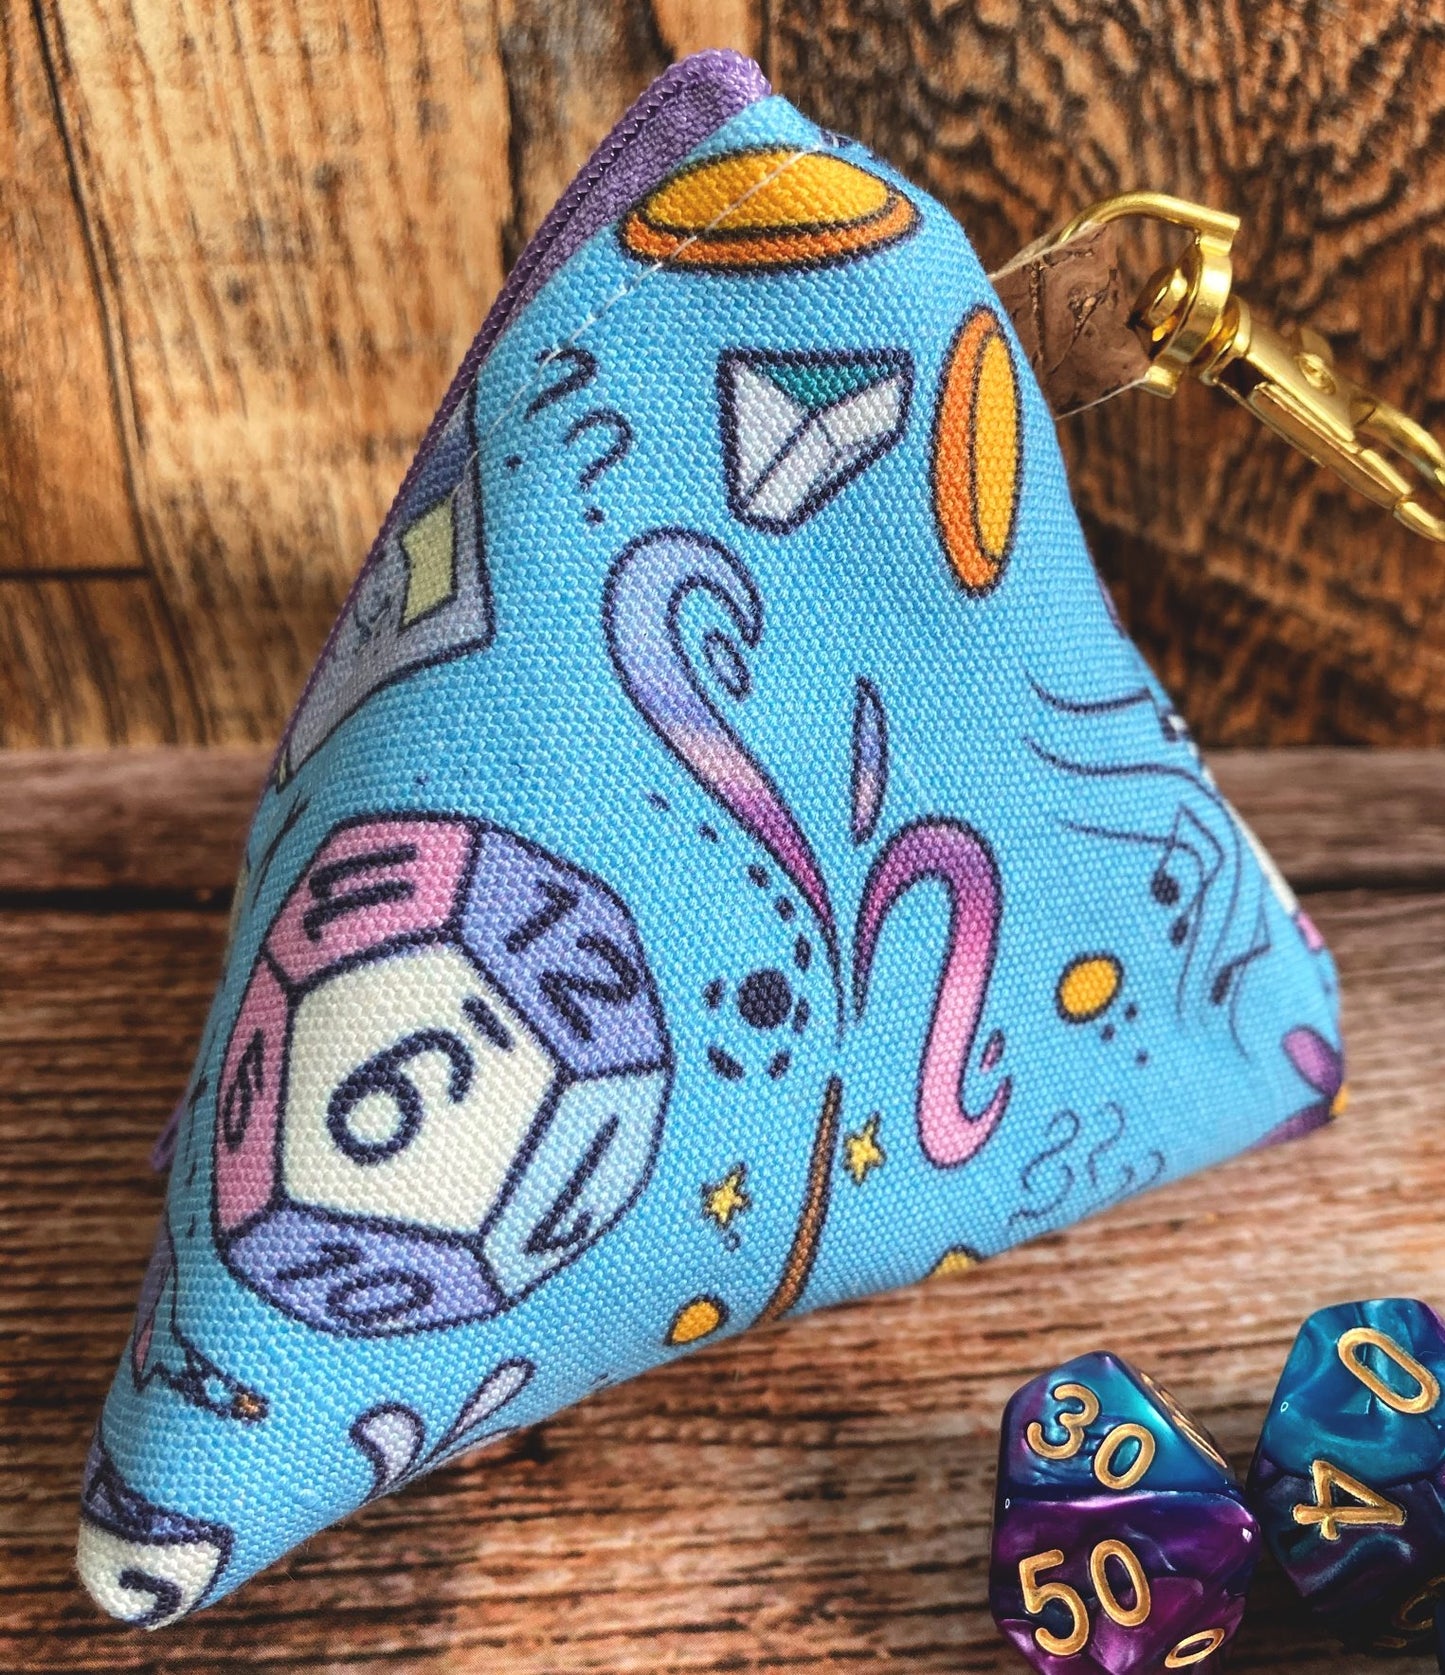 Copy of 4 Sided Pyramid Dice and Trinket Bag